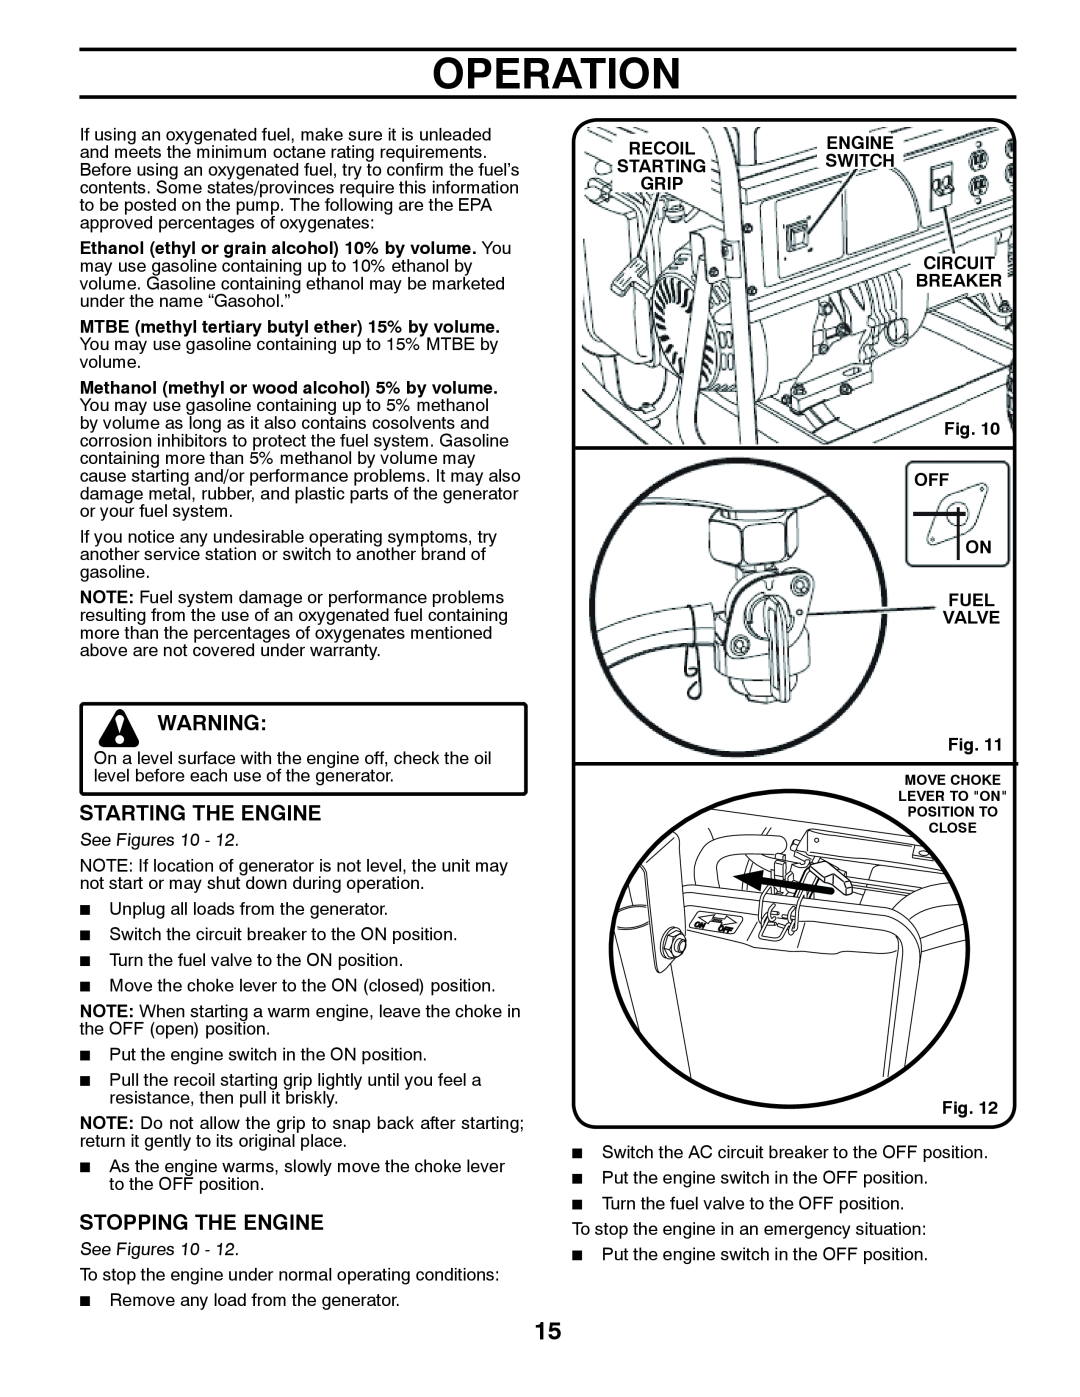 Poulan 420077 owner manual Operation, Starting The Engine, Stopping The Engine 